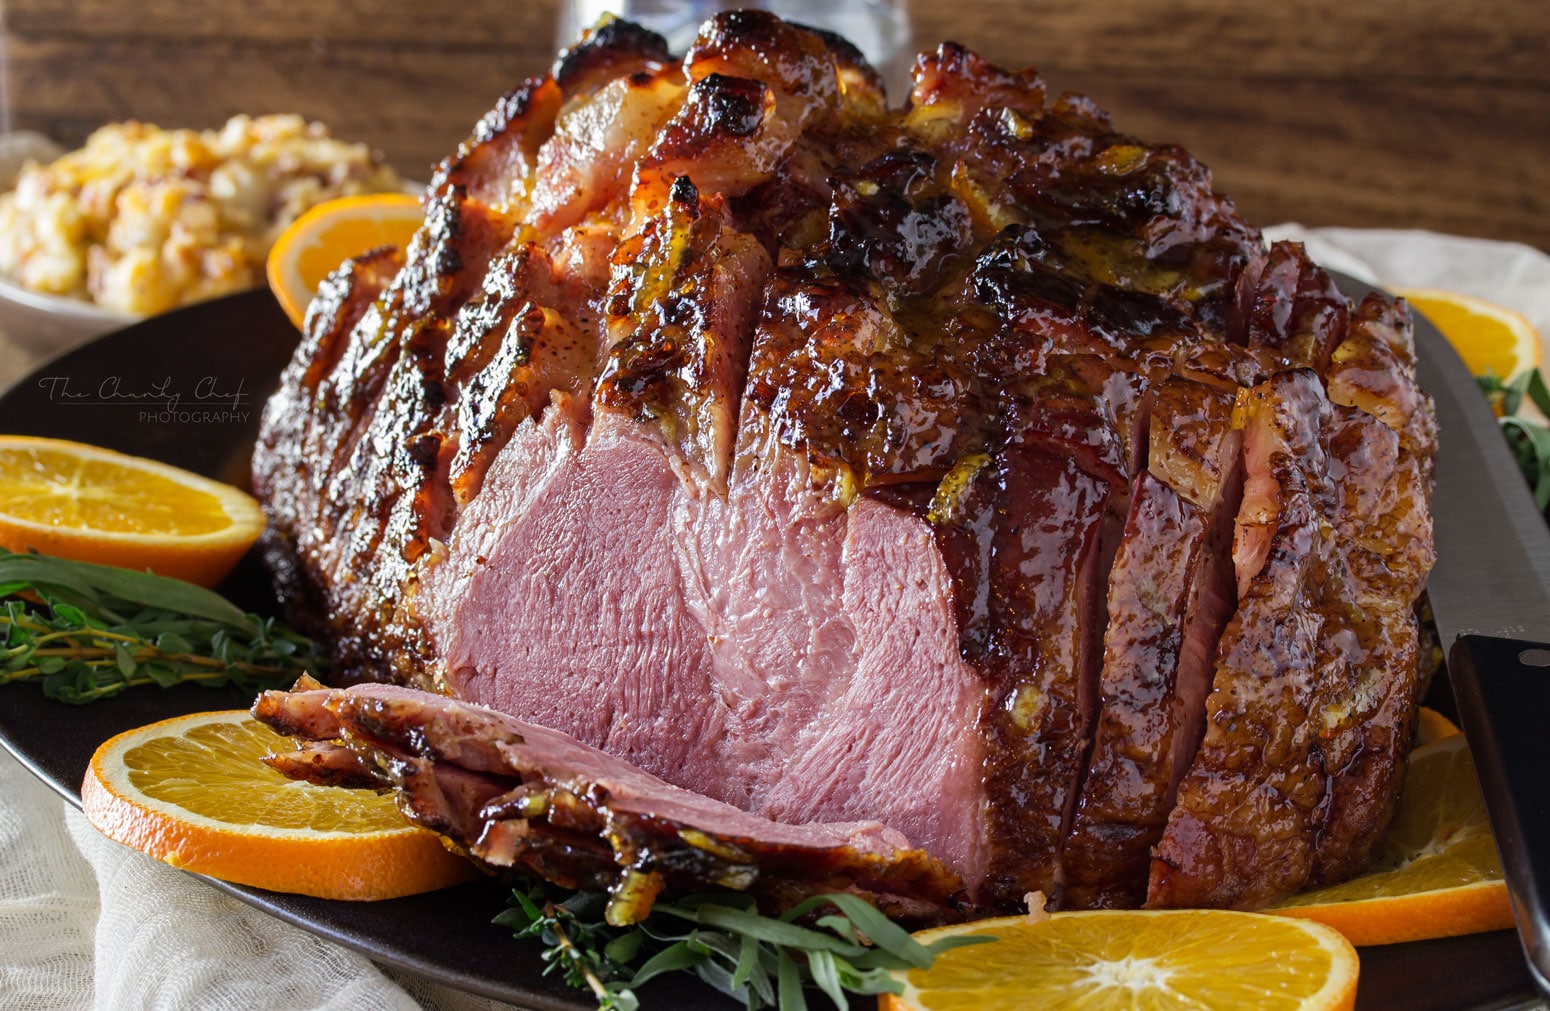 Bourbon Mustard Orange Glazed Ham | Sticky, sweet, tangy, and full of flavor... this bourbon mustard and orange glazed ham is one that you'll be happy to have as the star of your holiday meal! | http://thechunkychef.com